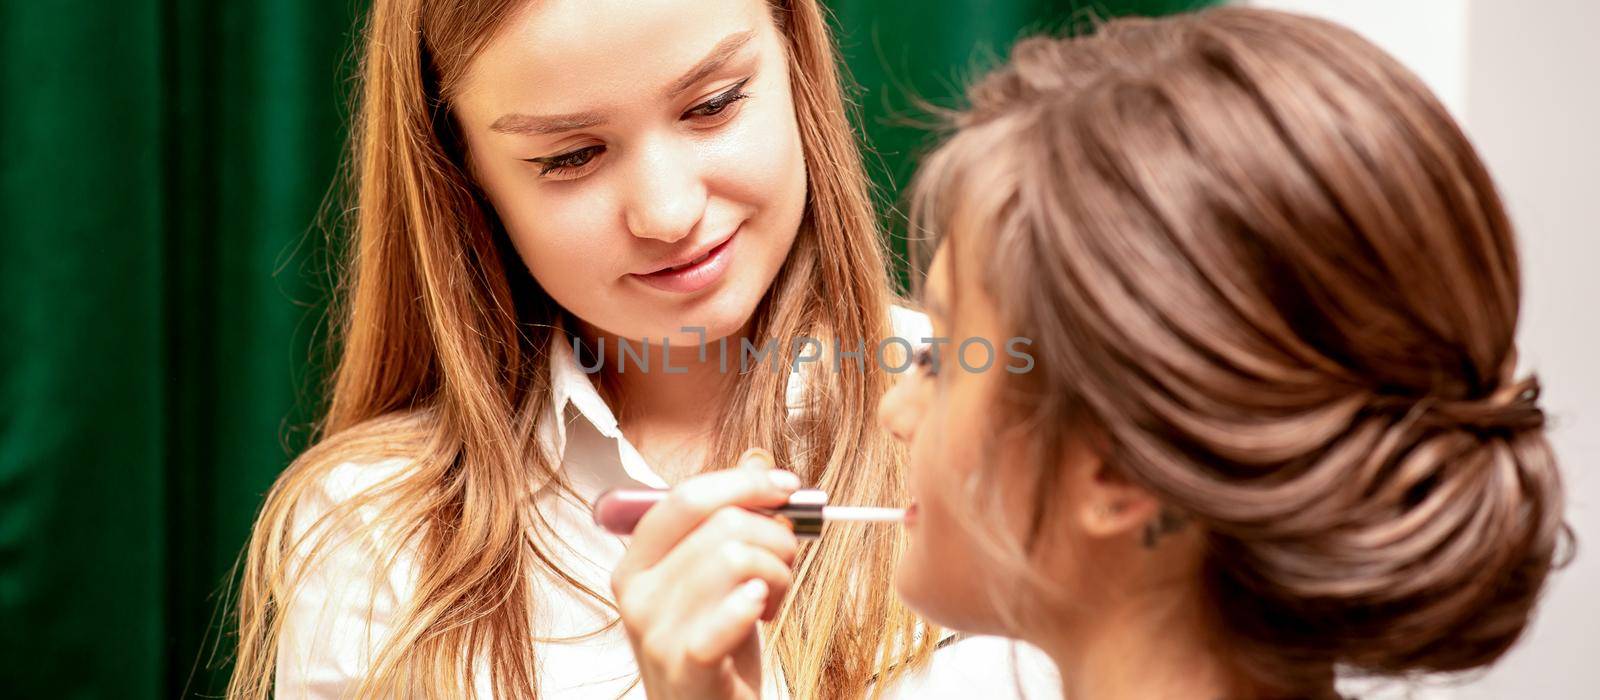 Makeup in the process. The makeup artist applies pink gloss lipstick on the lips of the beautiful face of the young caucasian woman in a beauty salon. by okskukuruza